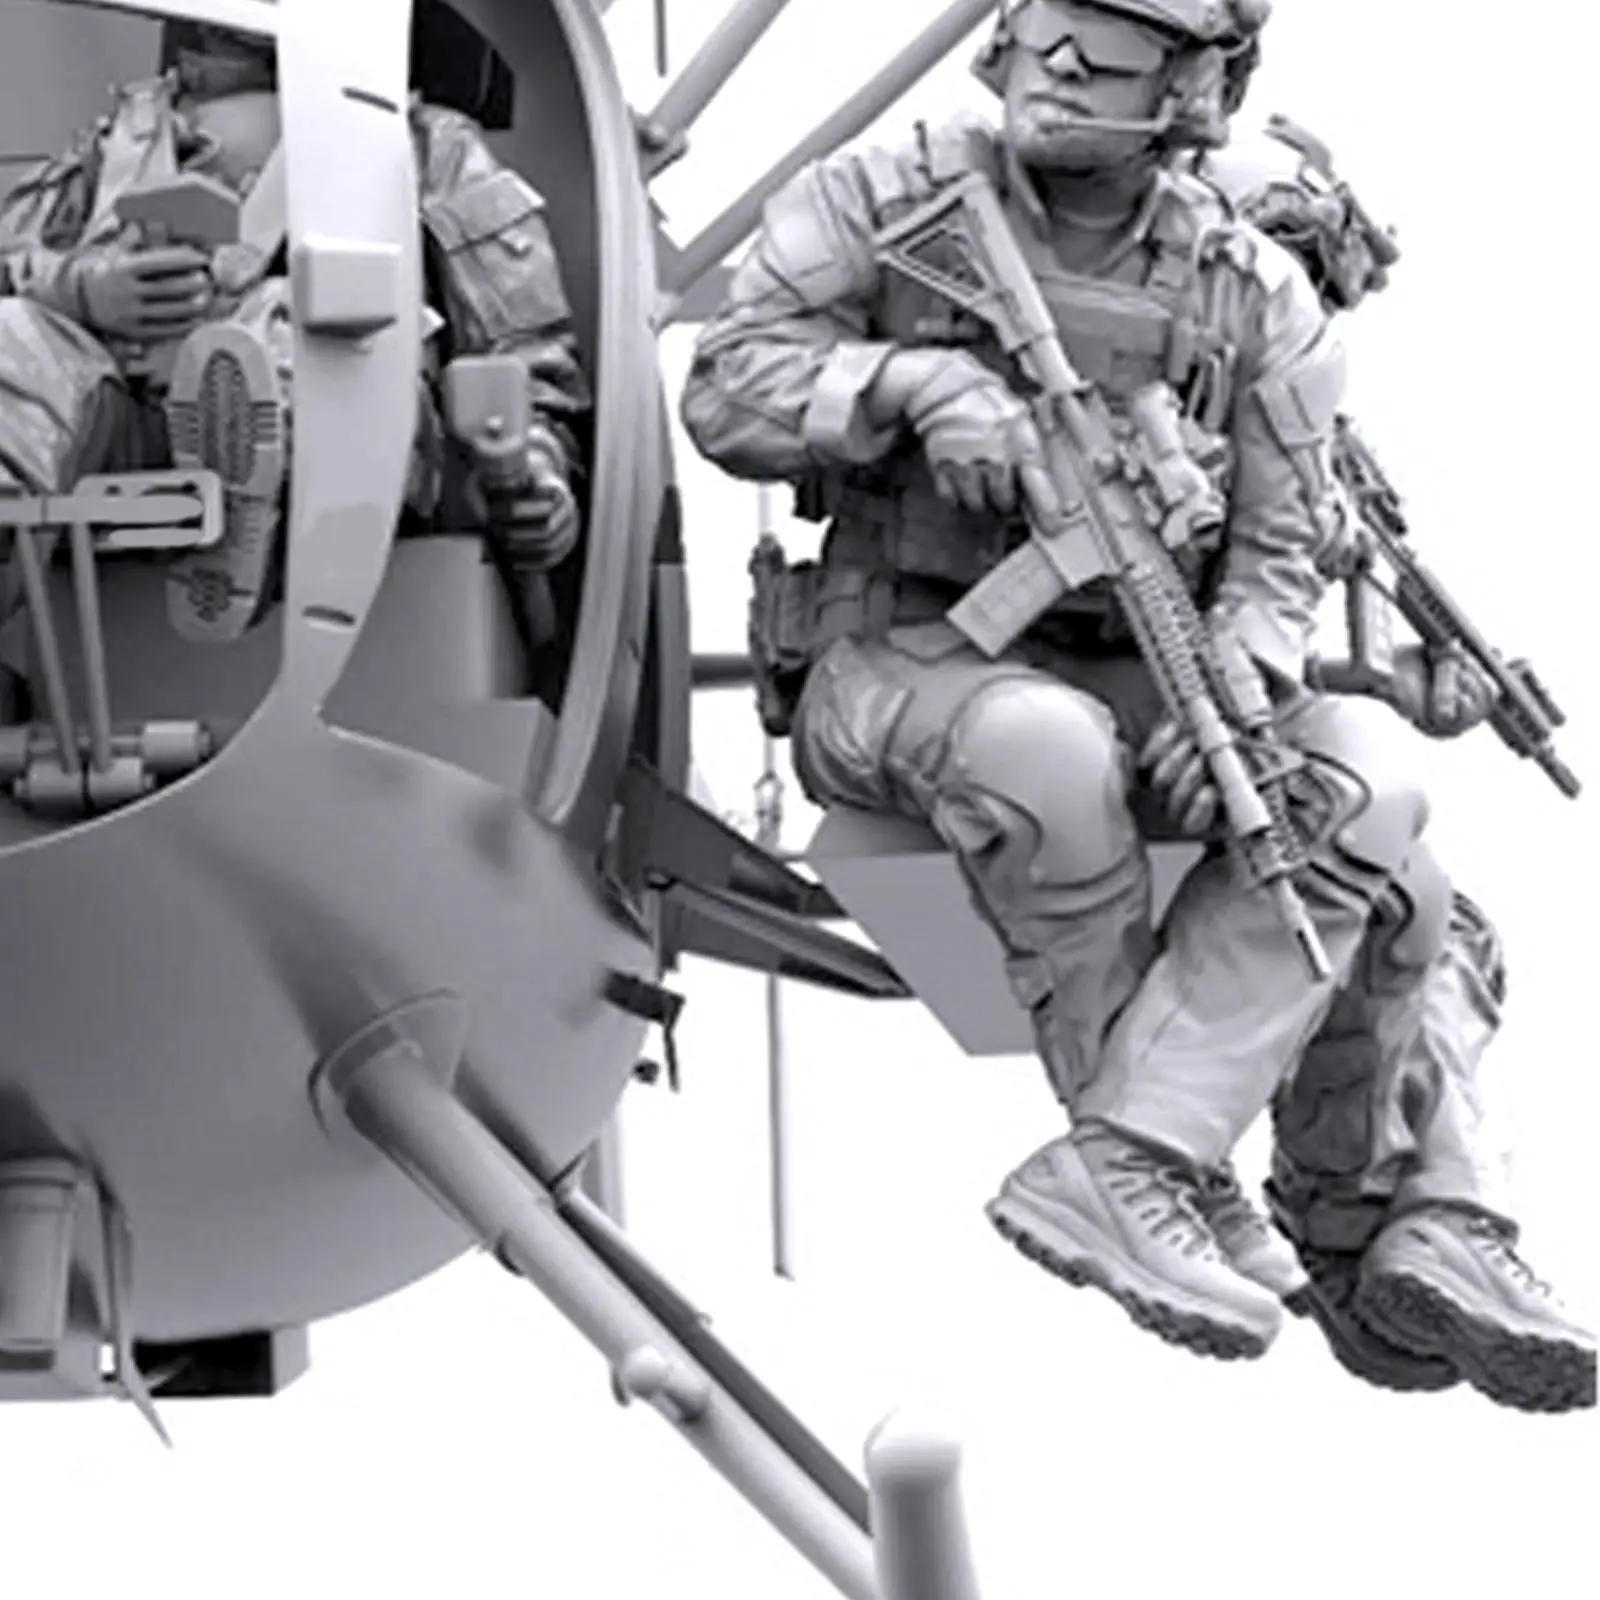 1/35 Resin US Helicopter Crew NO PLANE NO GUIDE 6 figures Unassembled Unpainted